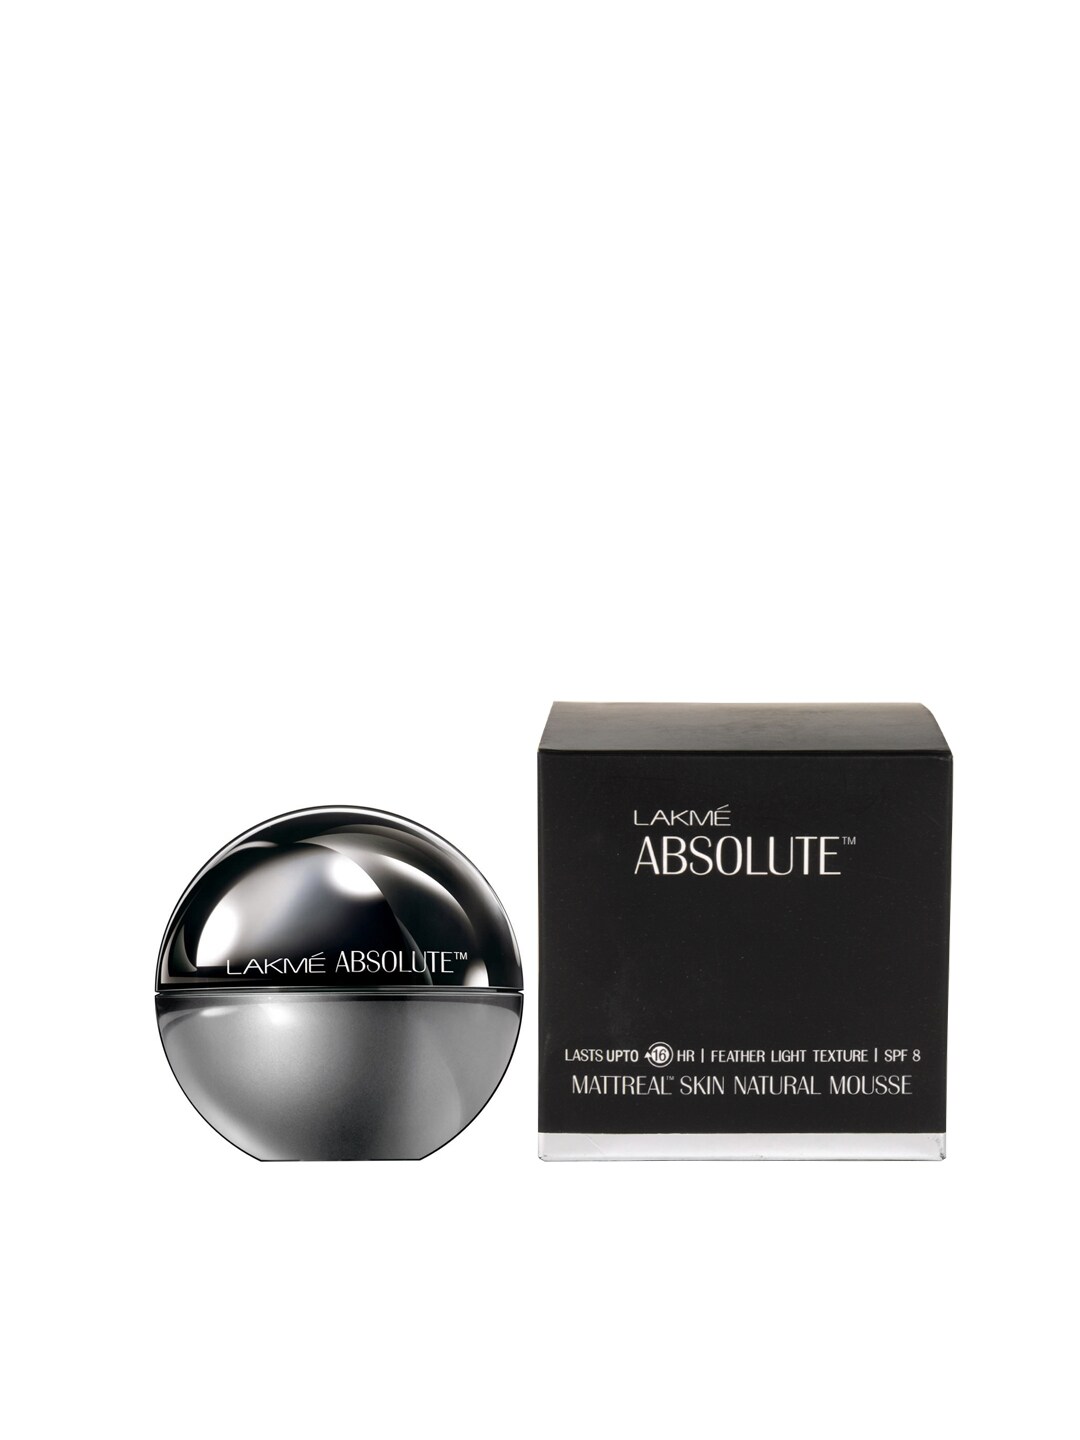 Lakme Absolute Mattreal Skin Natural Mousse - Rose Fair 02 25g Price in India